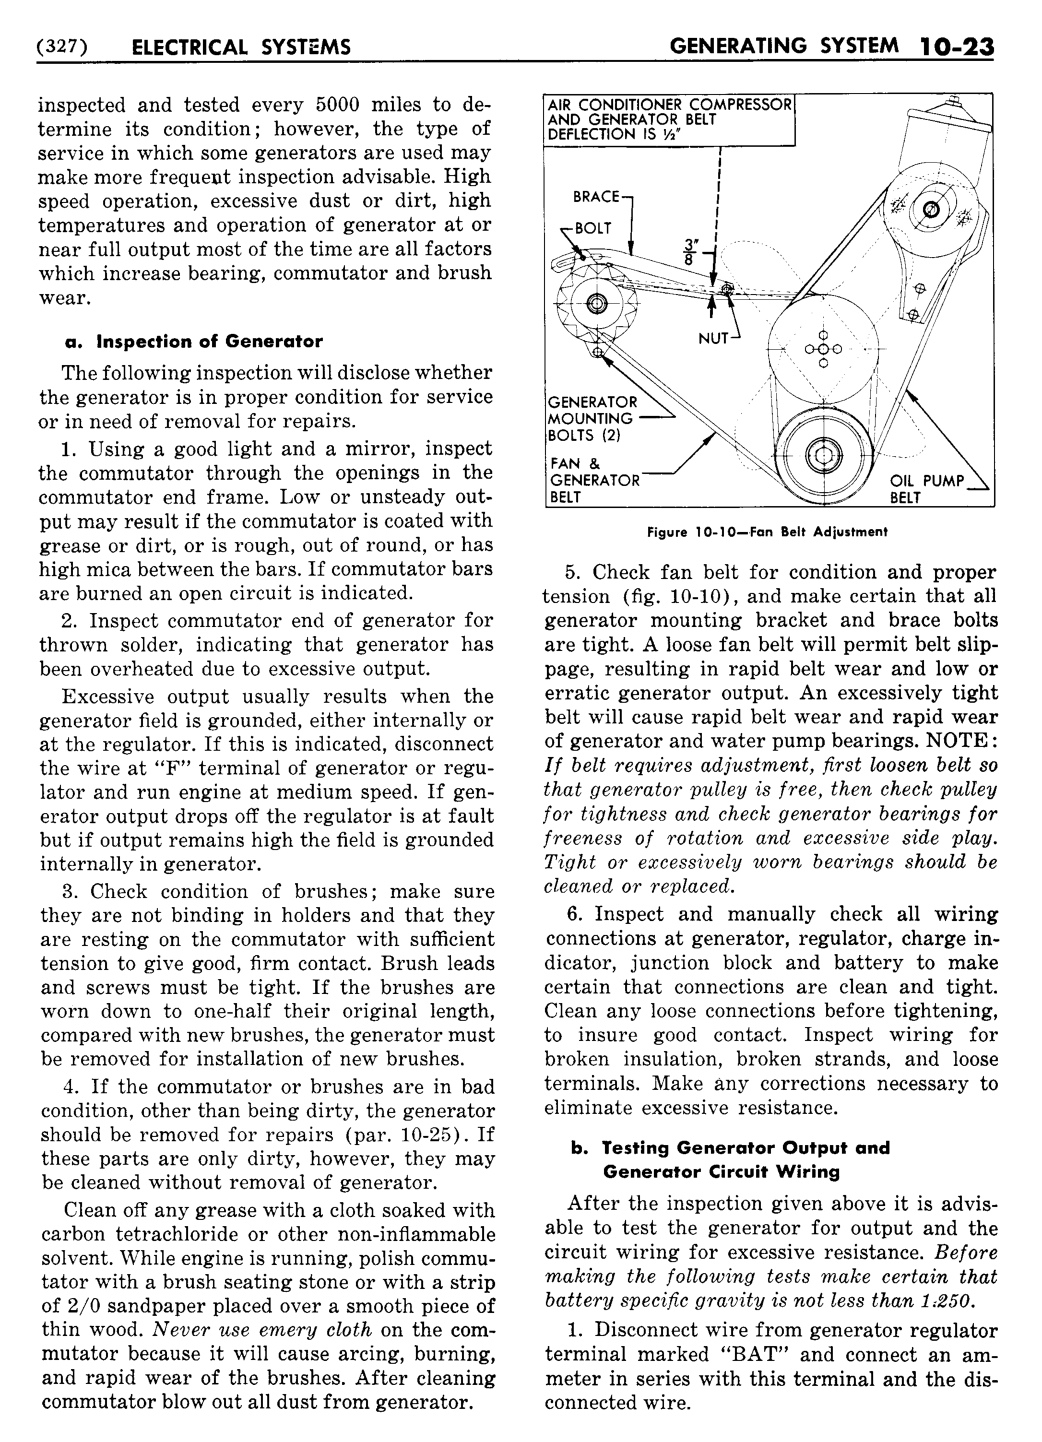 n_11 1955 Buick Shop Manual - Electrical Systems-023-023.jpg